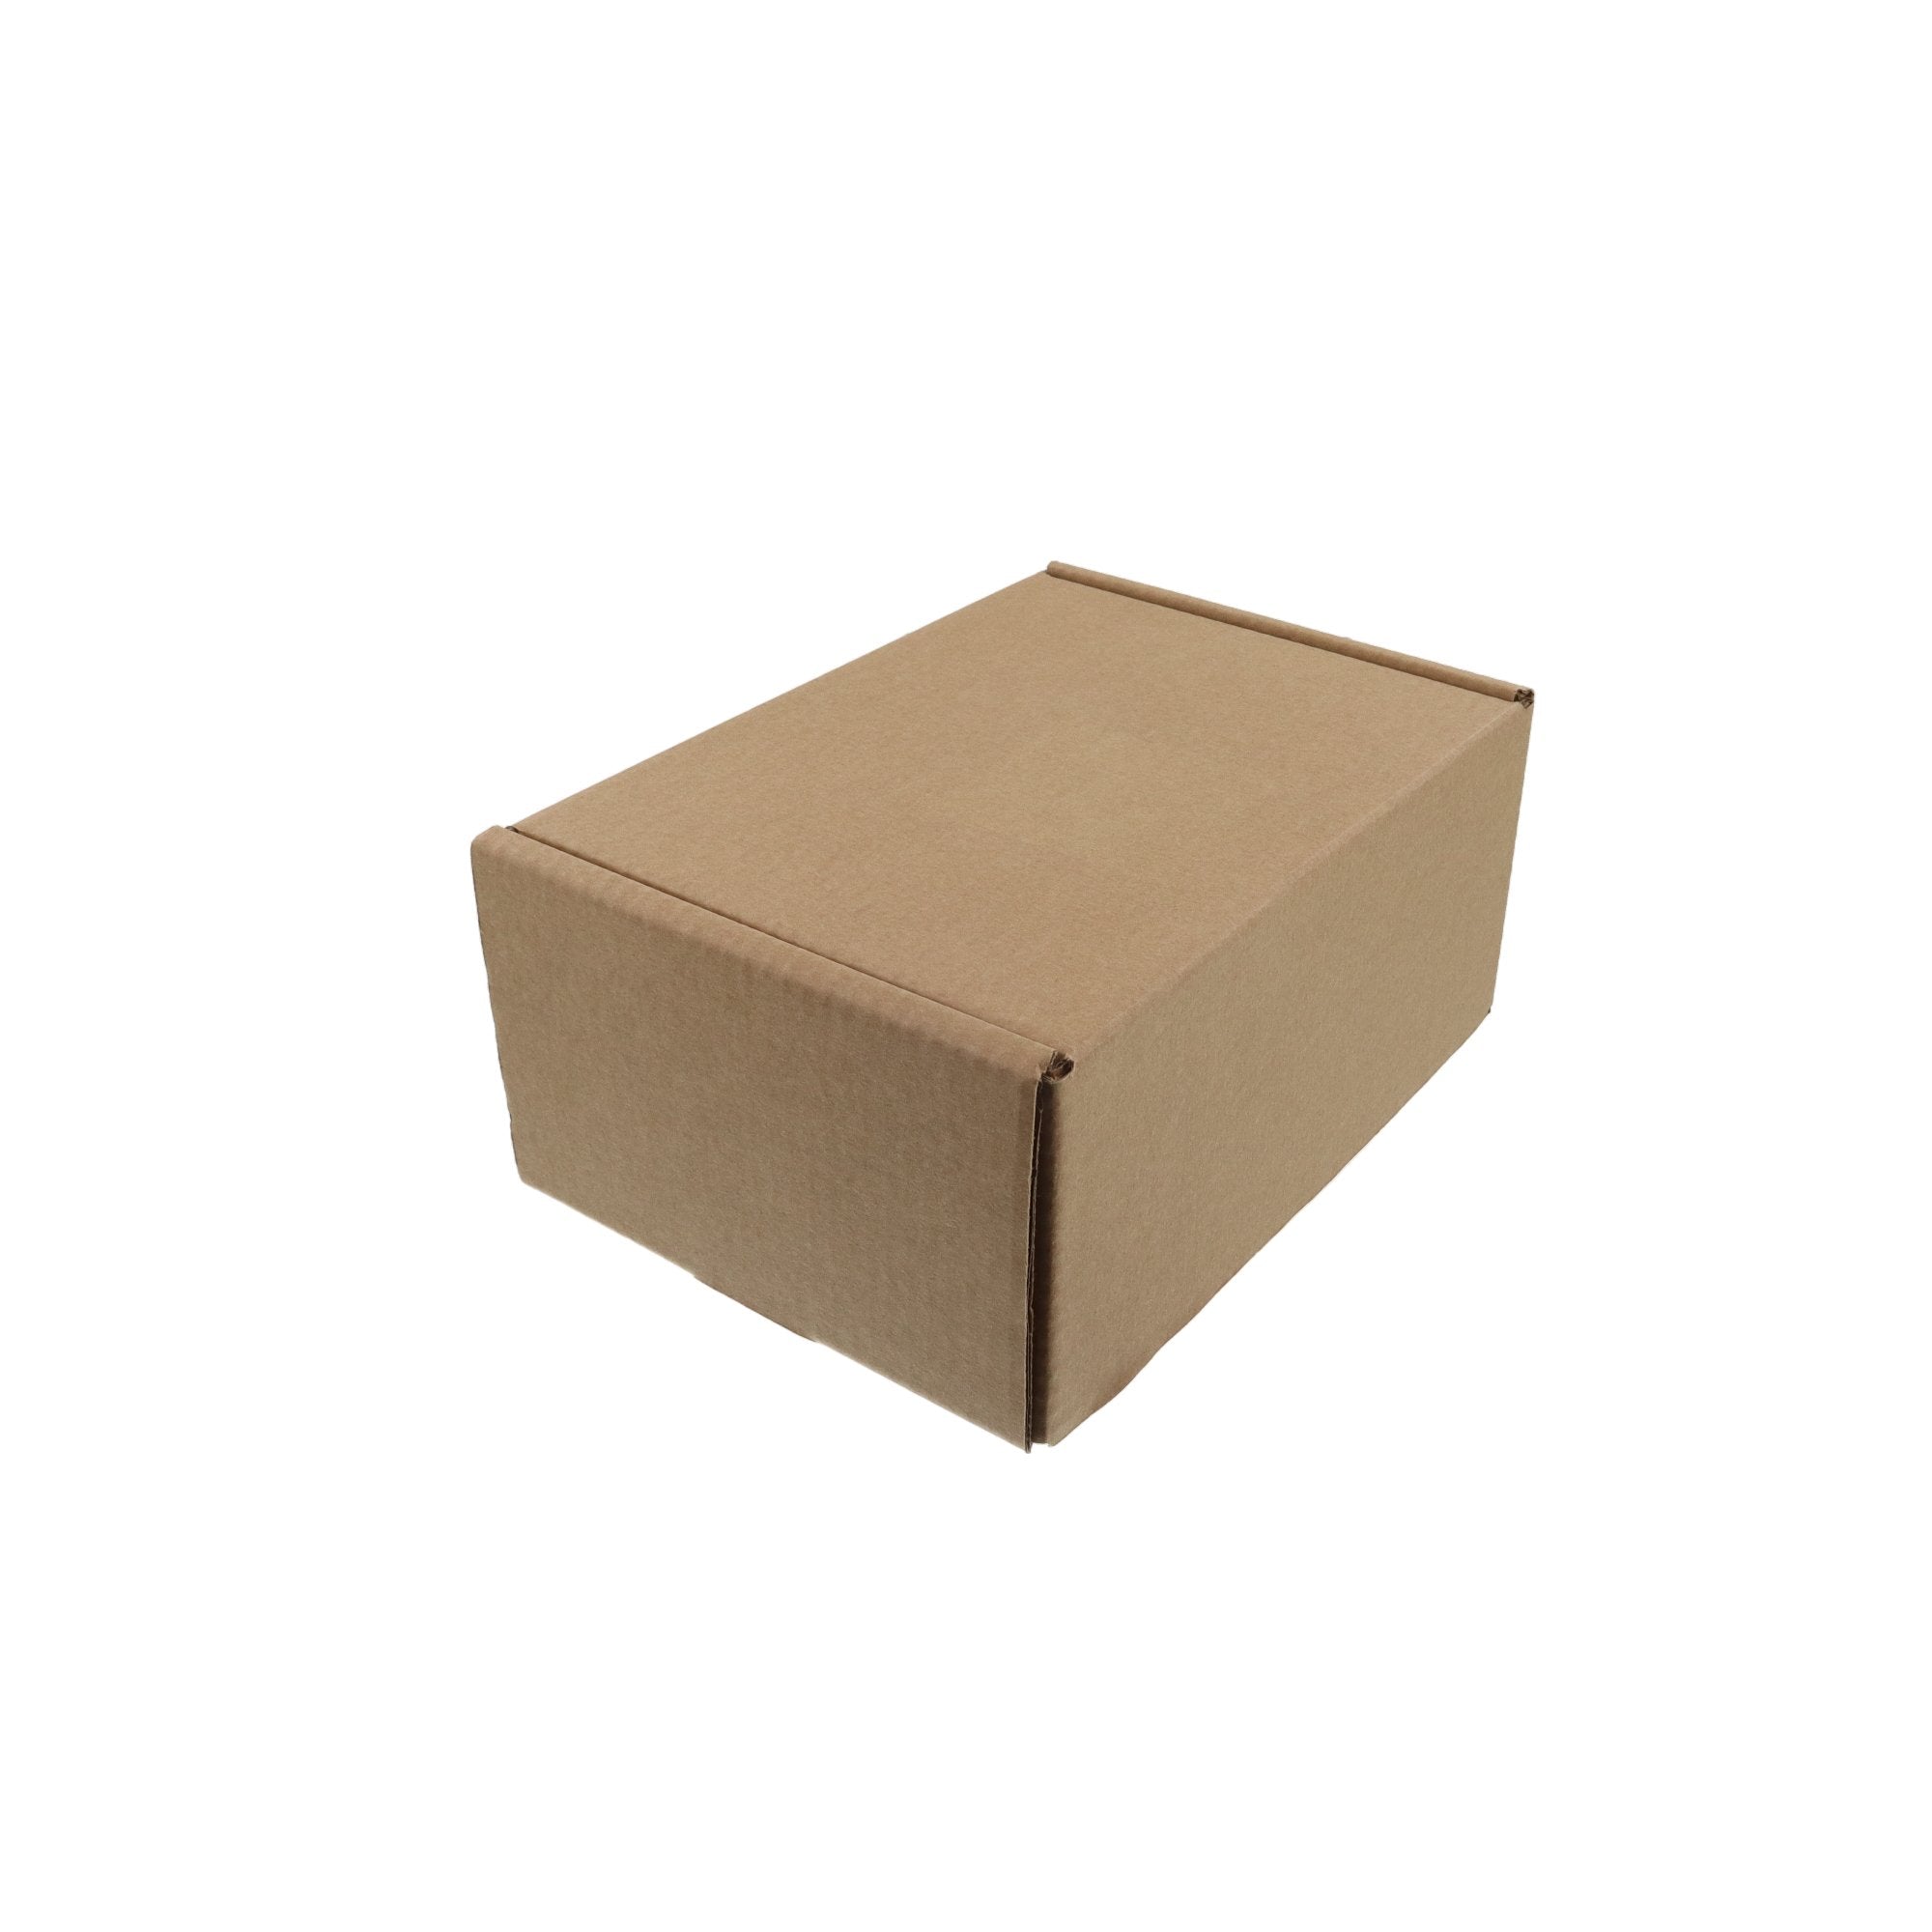 SAMPLE - Budget Mailer 4 One Piece Mailing Box [Express Value Buy] - PackQueen